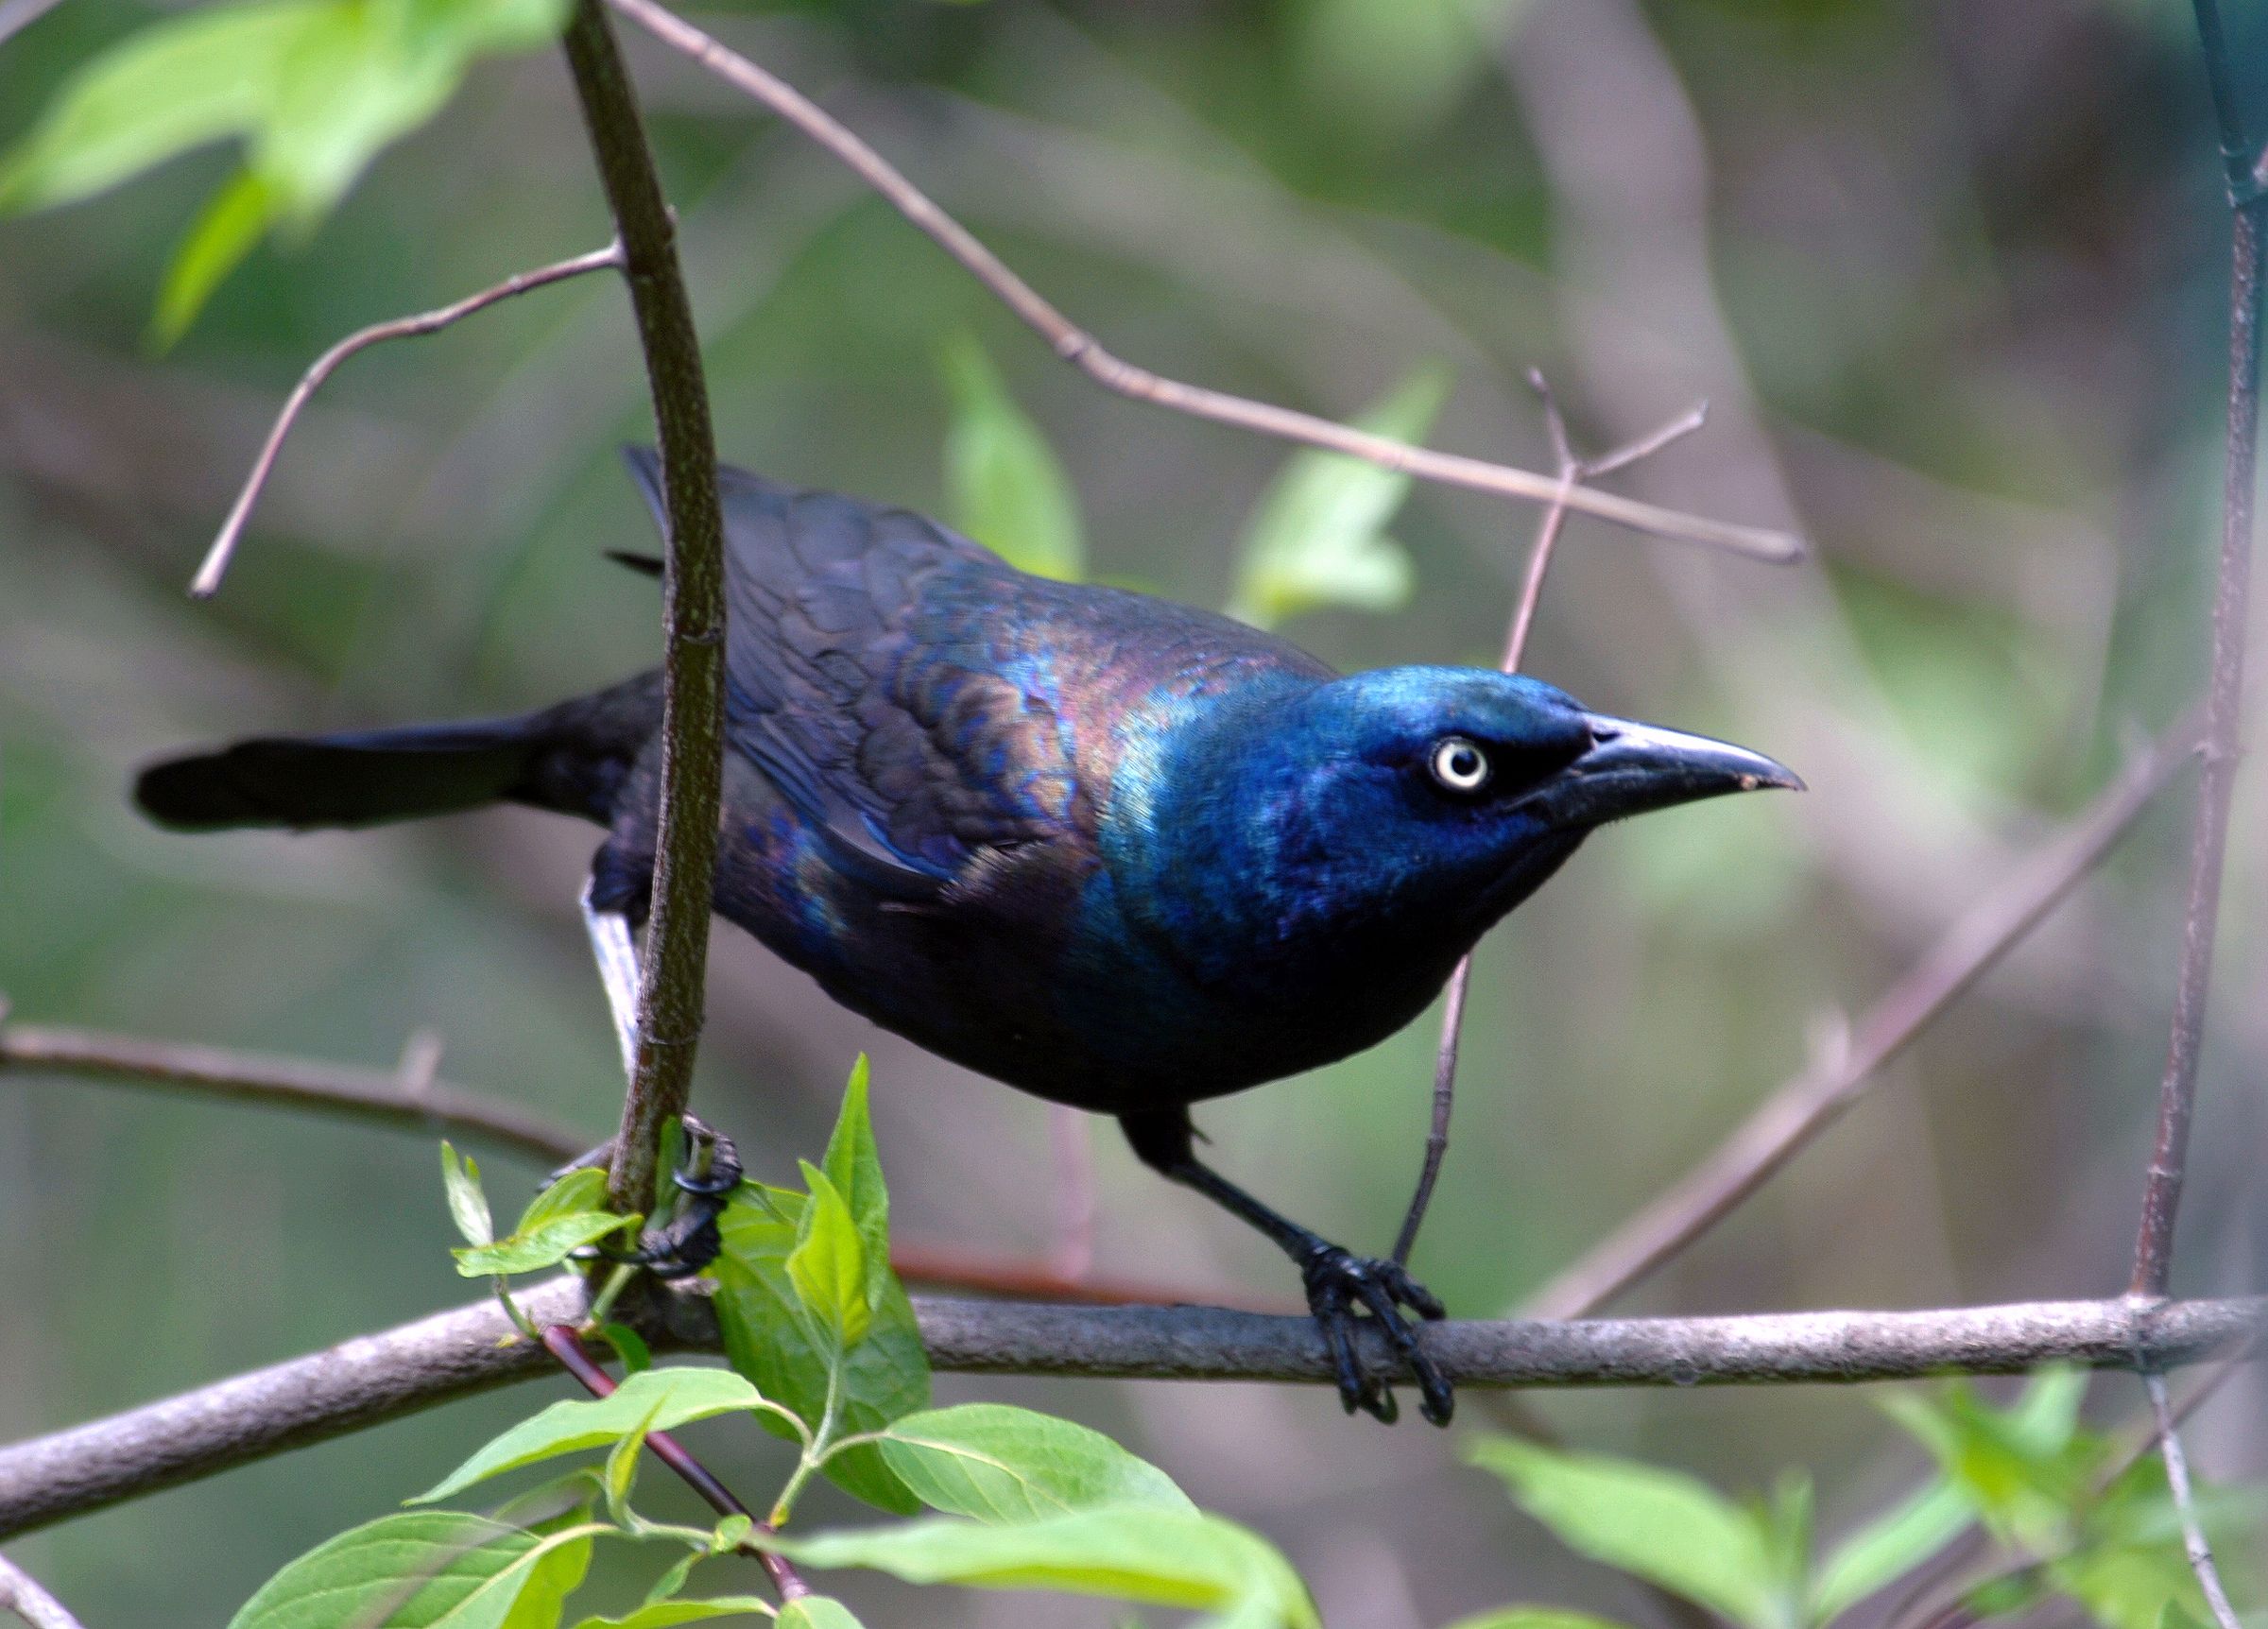 Creaker the Grackle is half the size of a crow. He belongs to the ...